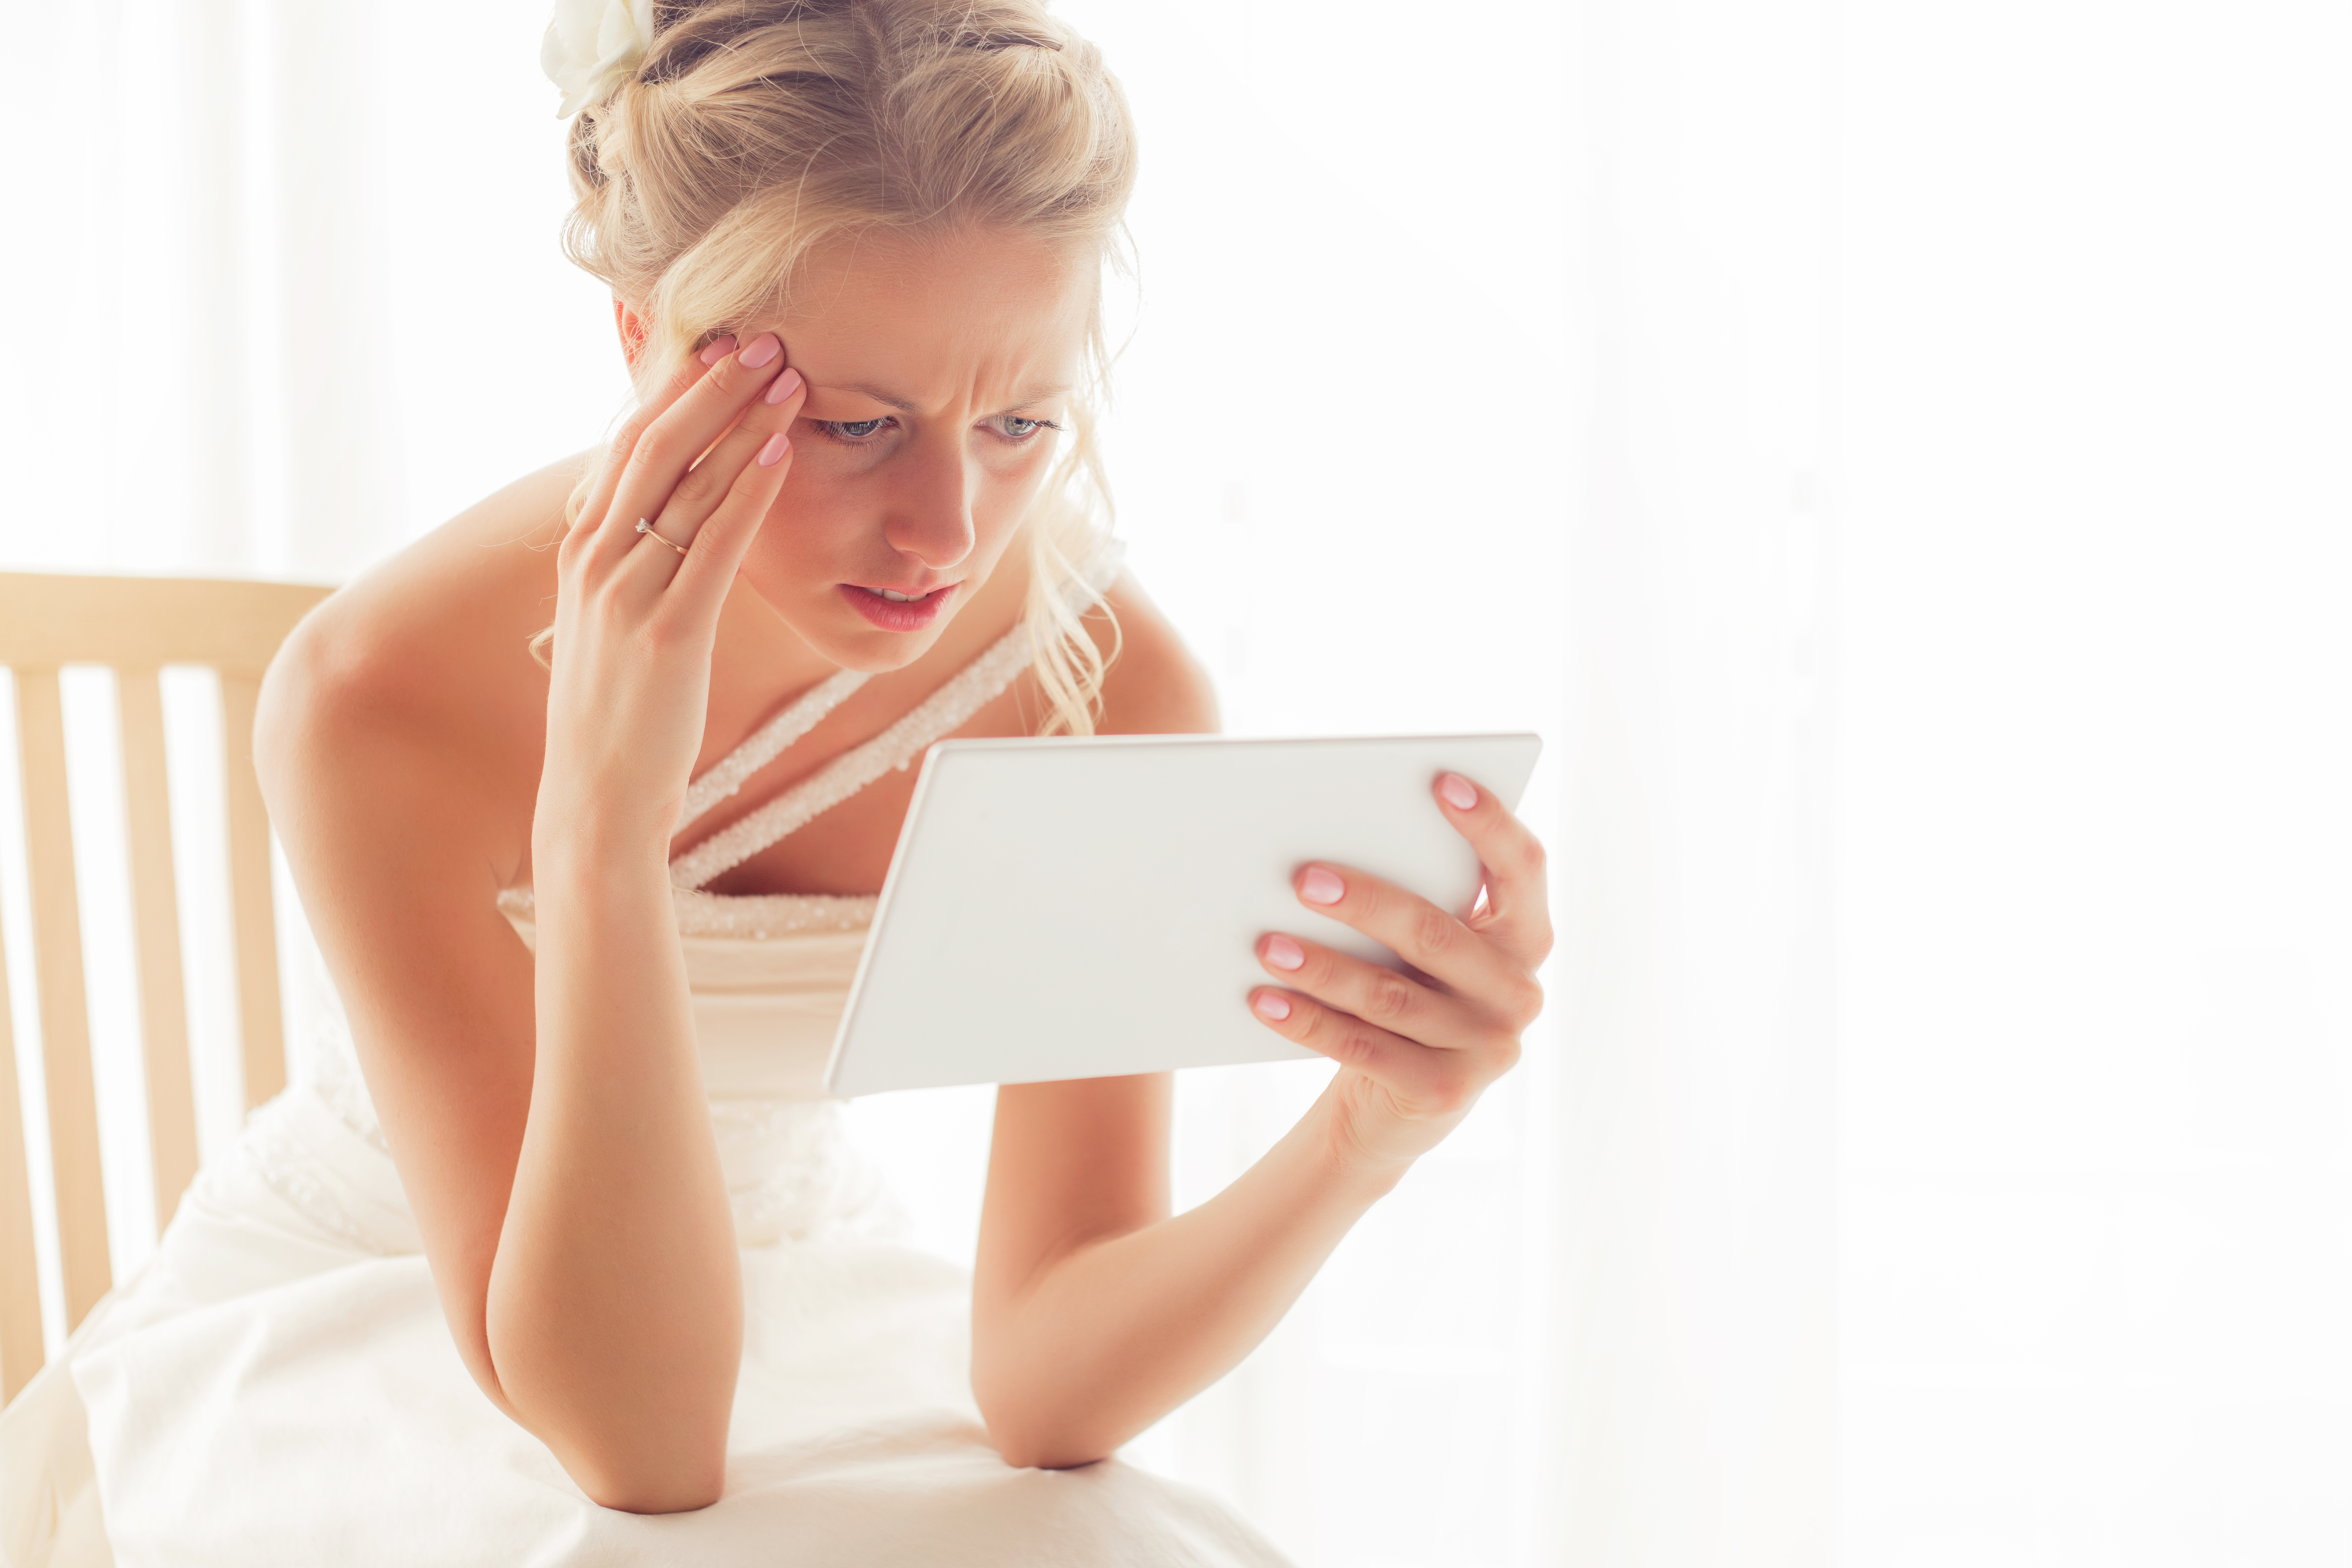 A worried bride looking at a tablet | Source: Shutterstock